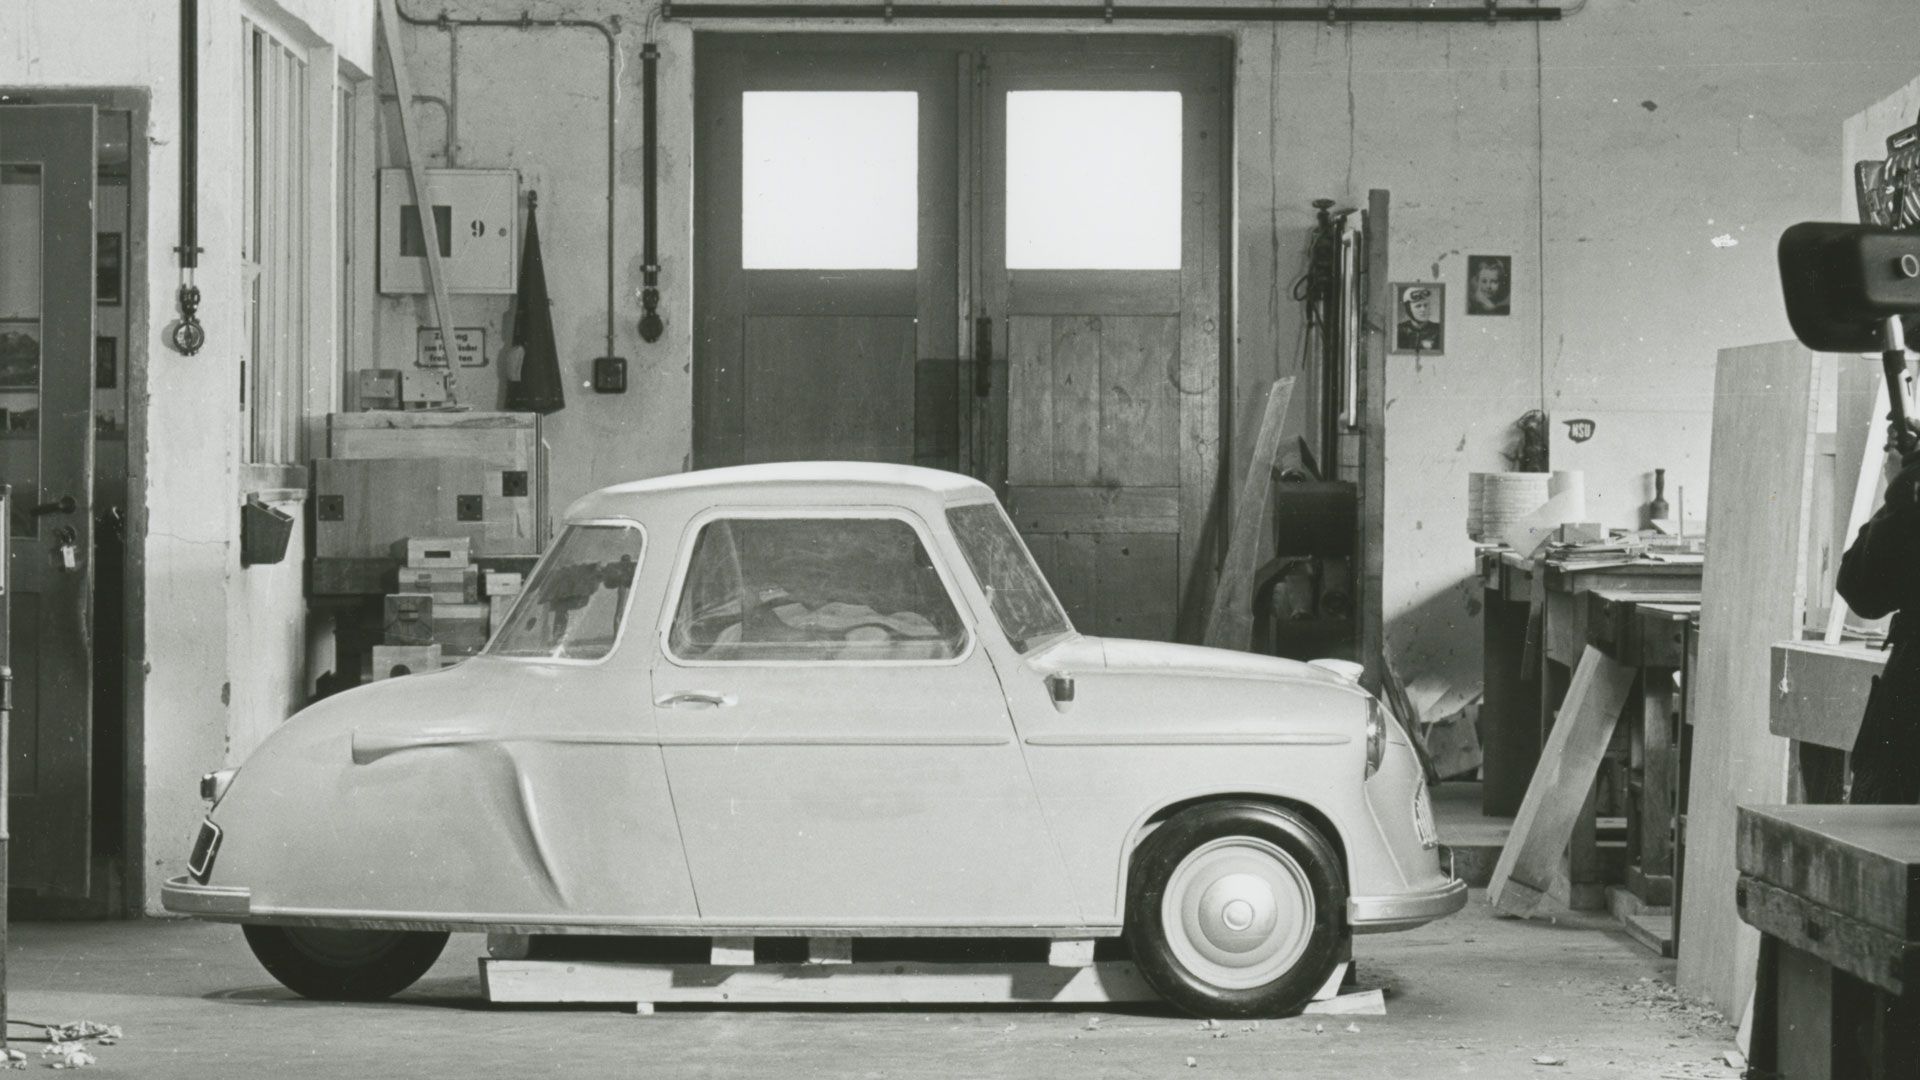 Walter Emerich helped produce the three-wheeled “Max-Kabine” scooter in 1953. 